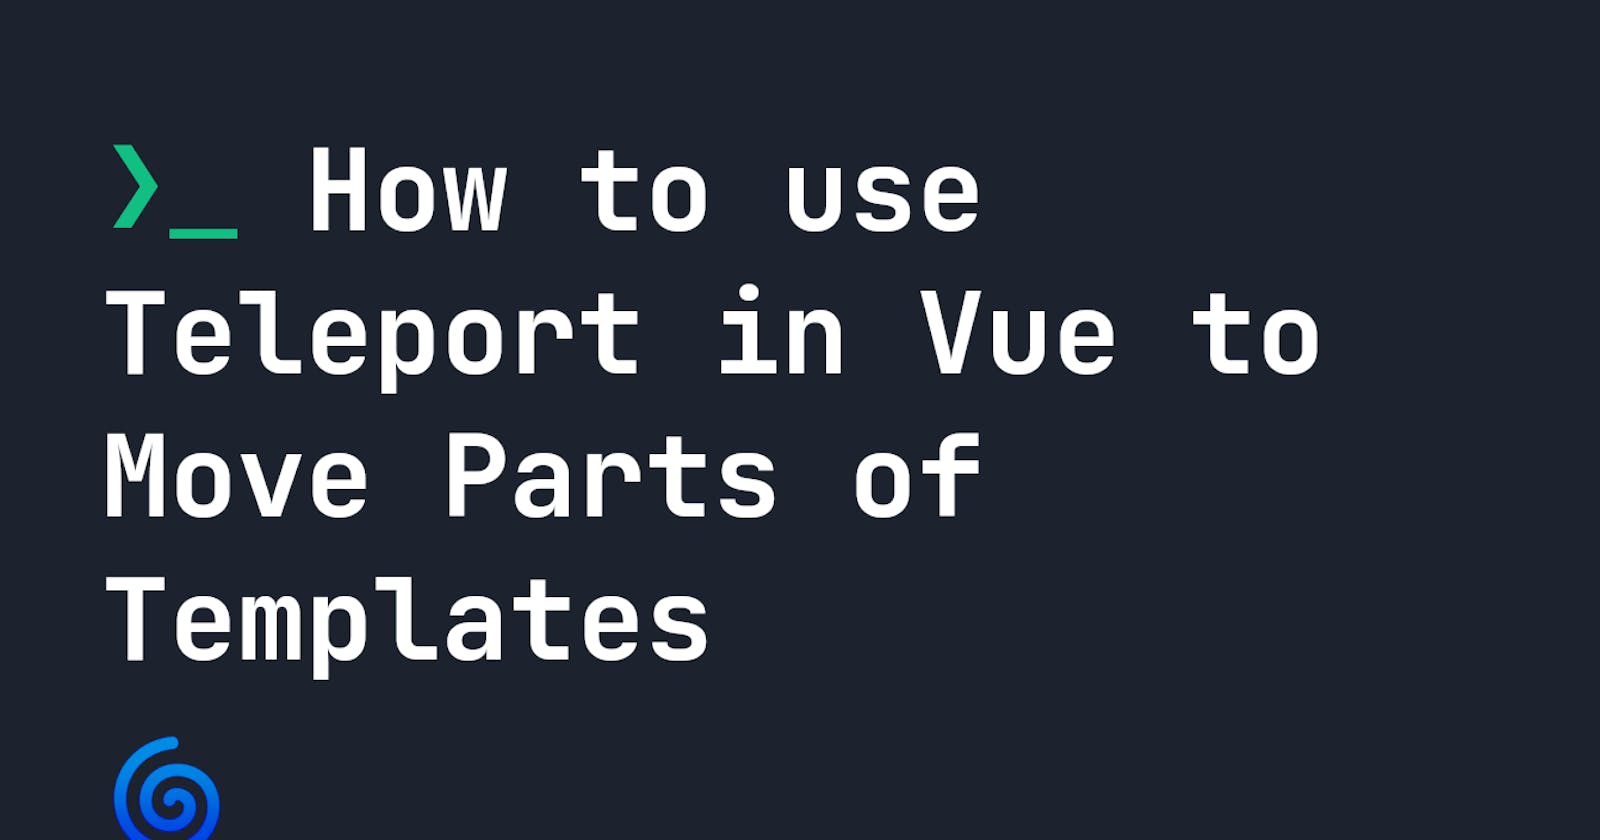 How to use Teleport in Vue to Move Parts of Templates